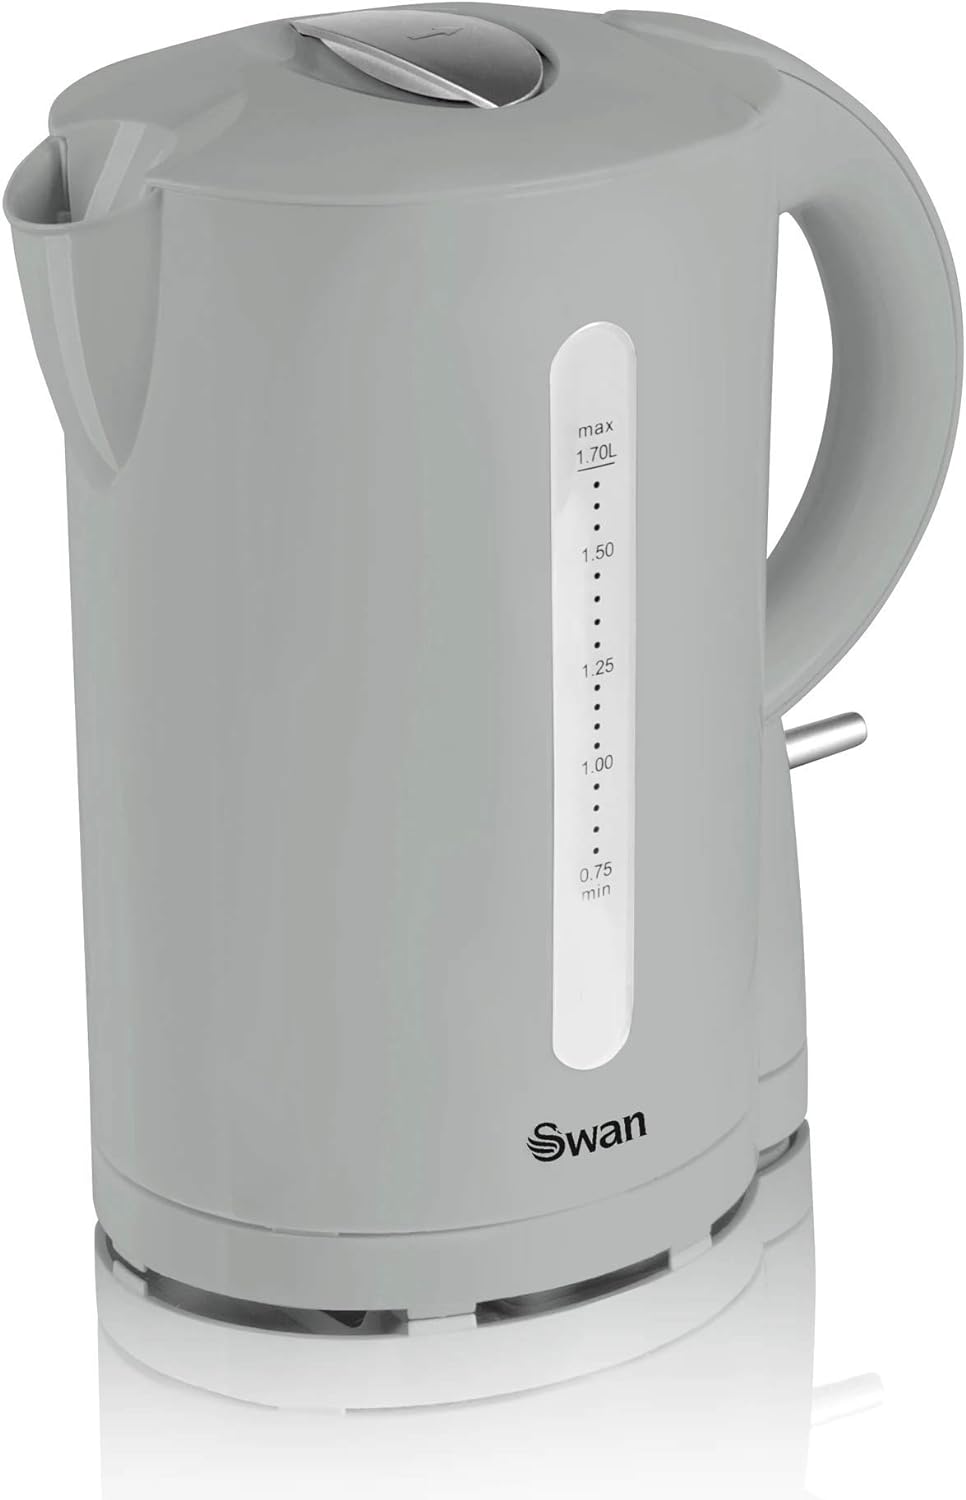 Swan SK18121N Jug Kettle with Rapid Boil, Detachable Filter, 1.7L, 2200W, White - Amazing Gadgets Outlet